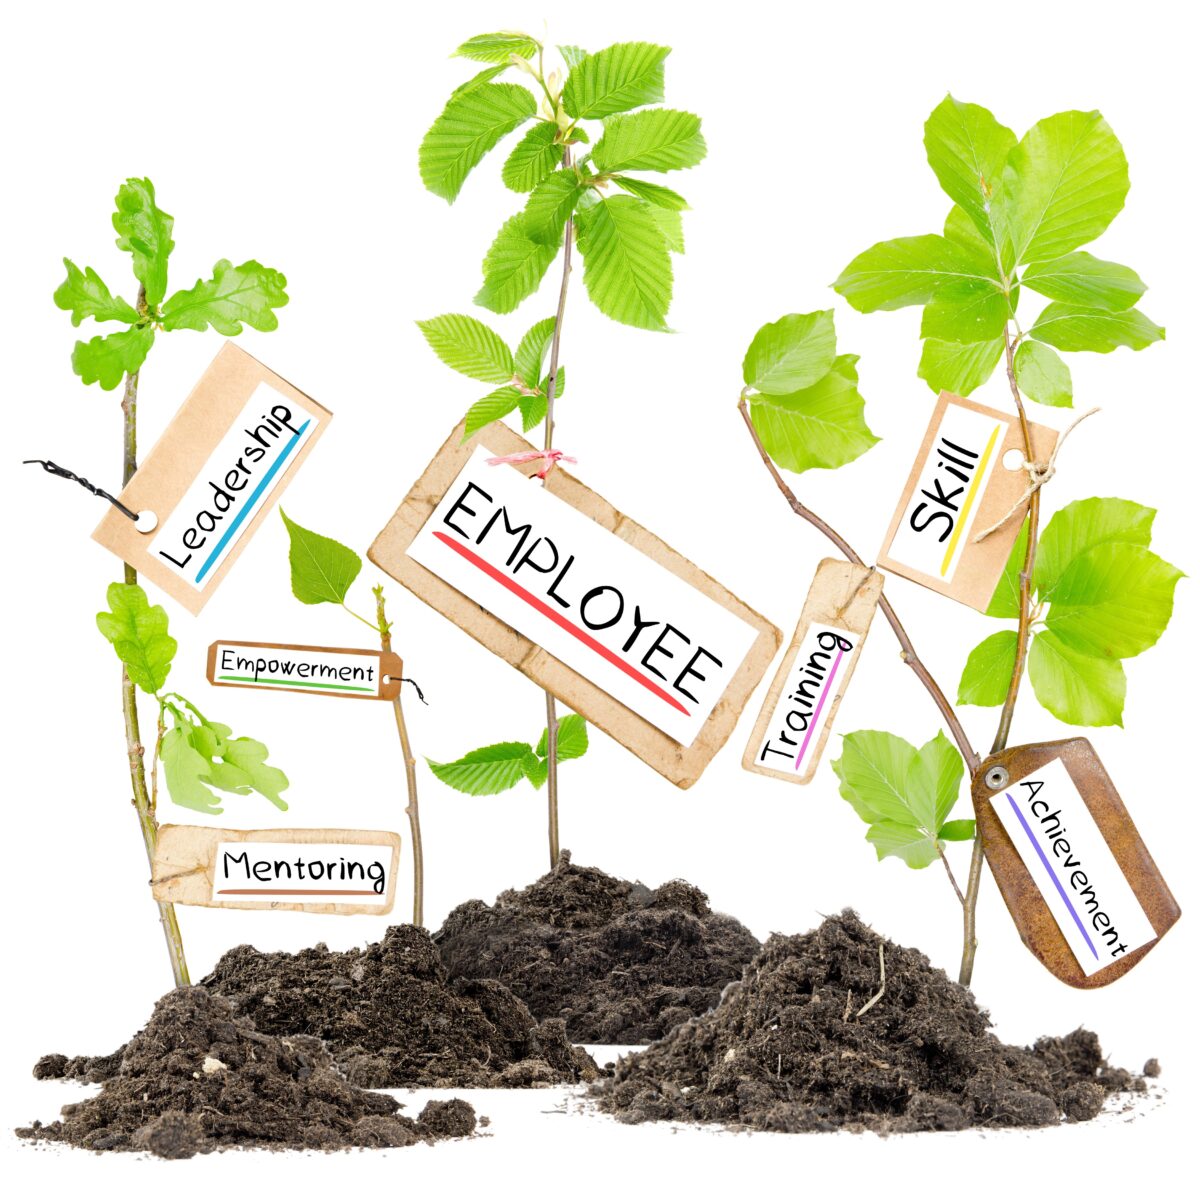 Photo,Of,Plants,Growing,From,Soil,Heaps,With,Employee,Conceptual